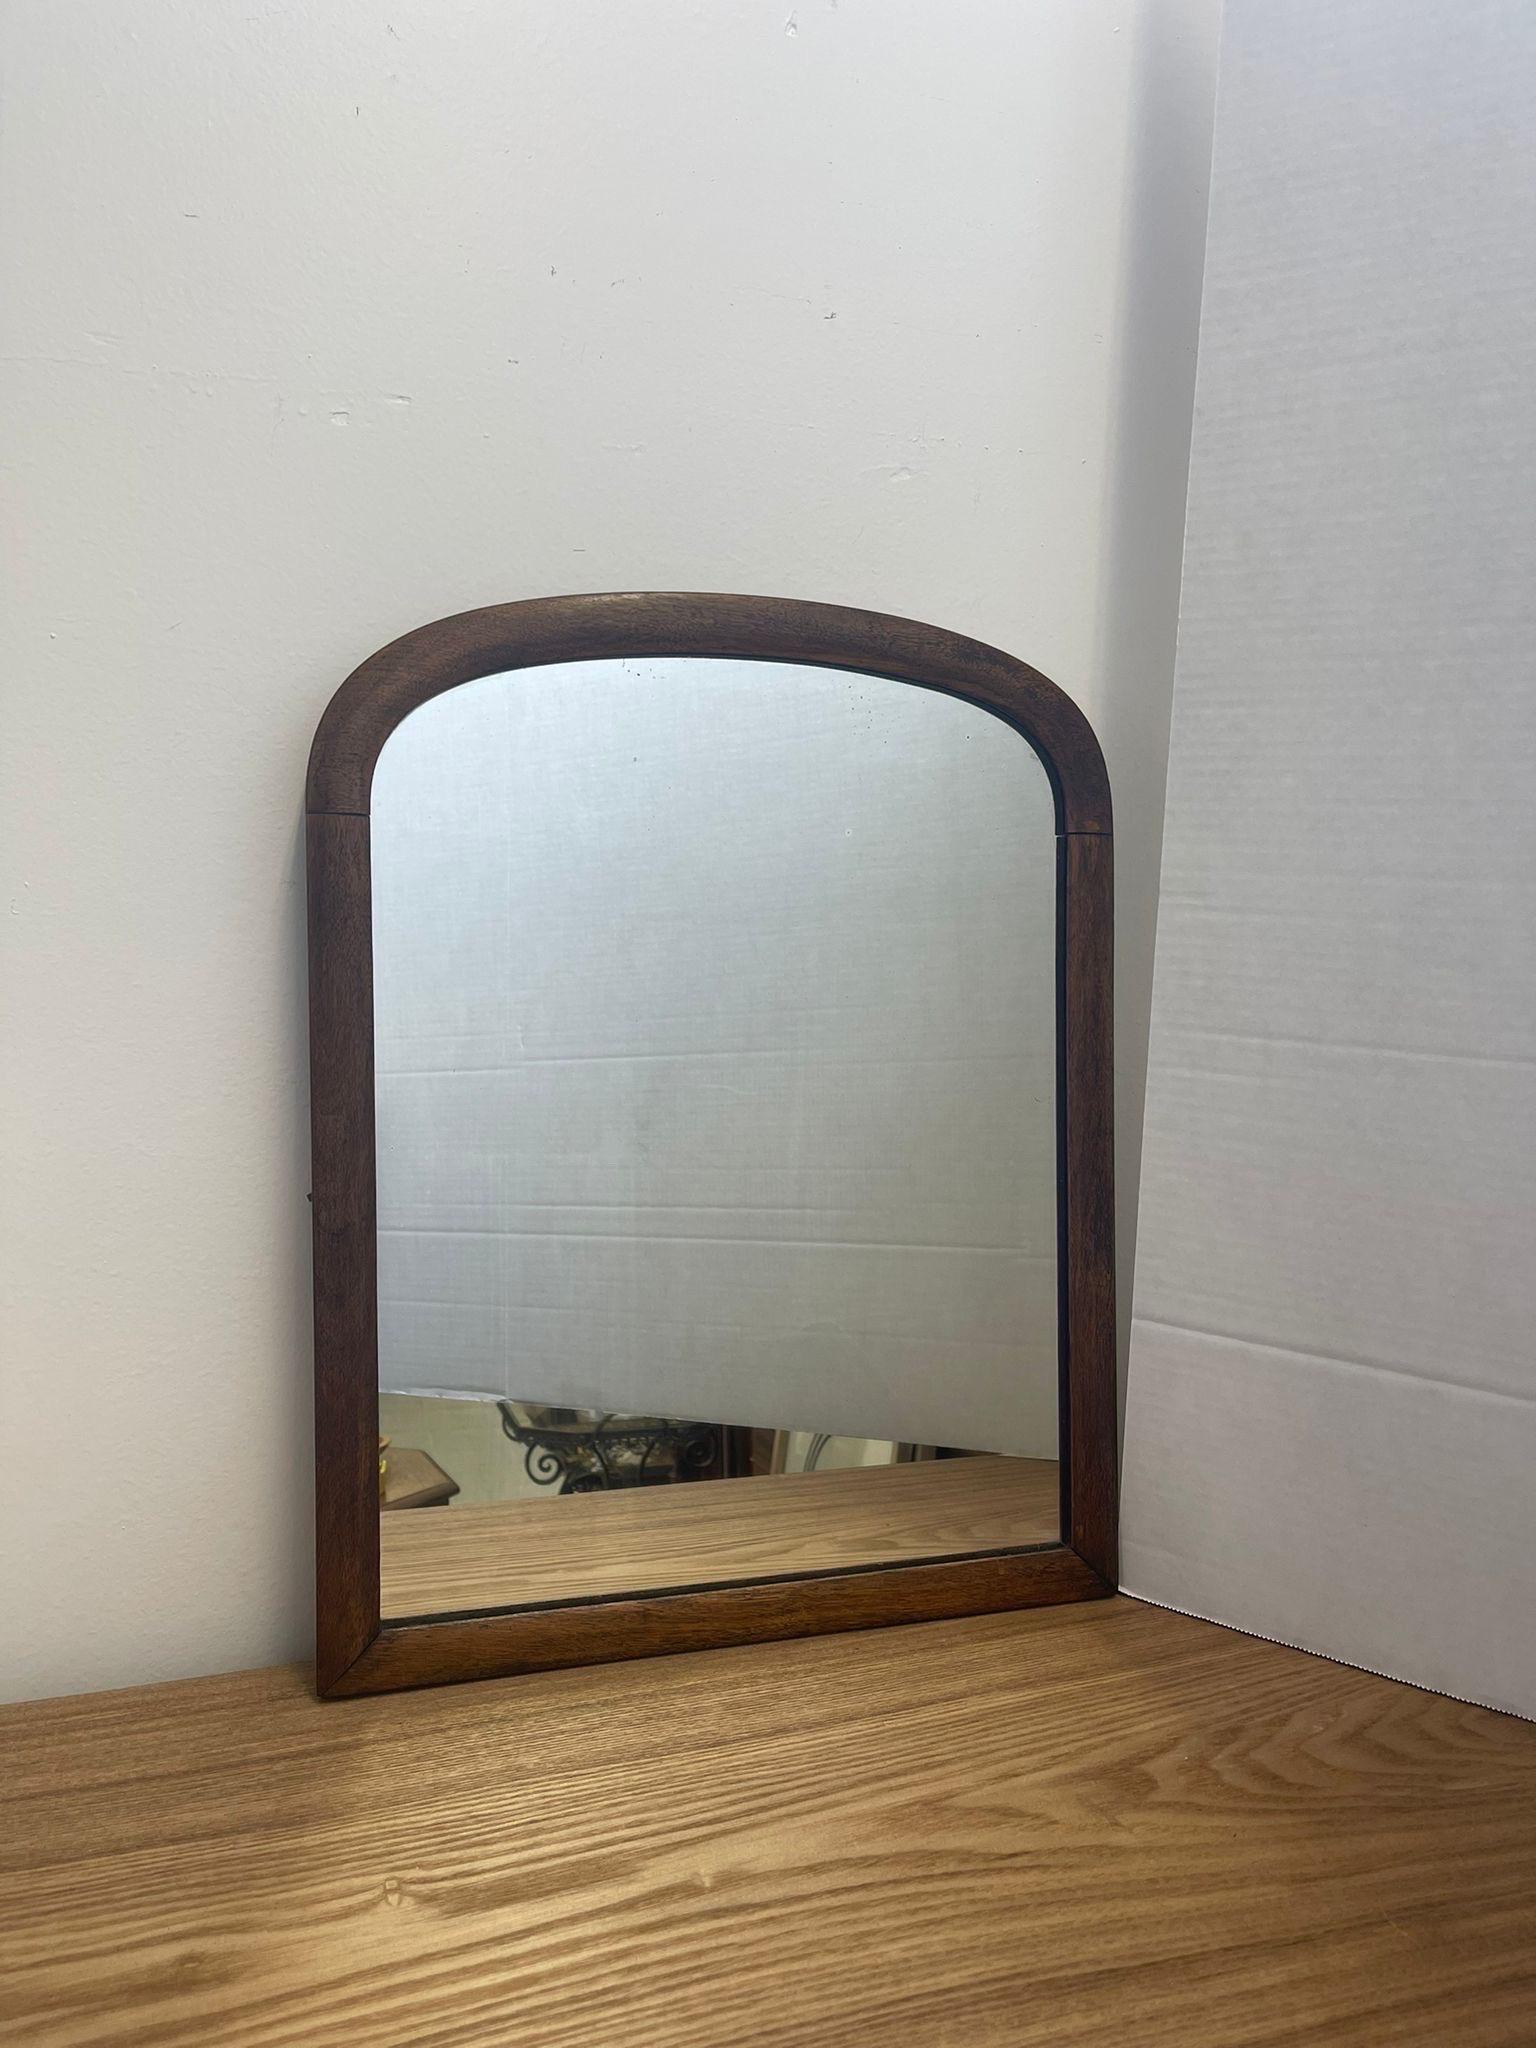 This Arched Wall Mirror toned with original hardware. Slight patina to the glass shows age. Vintage Condition Consistent with Age as Pictured.

Dimensions. 15 1/2 W ; 1 D ; 20 H